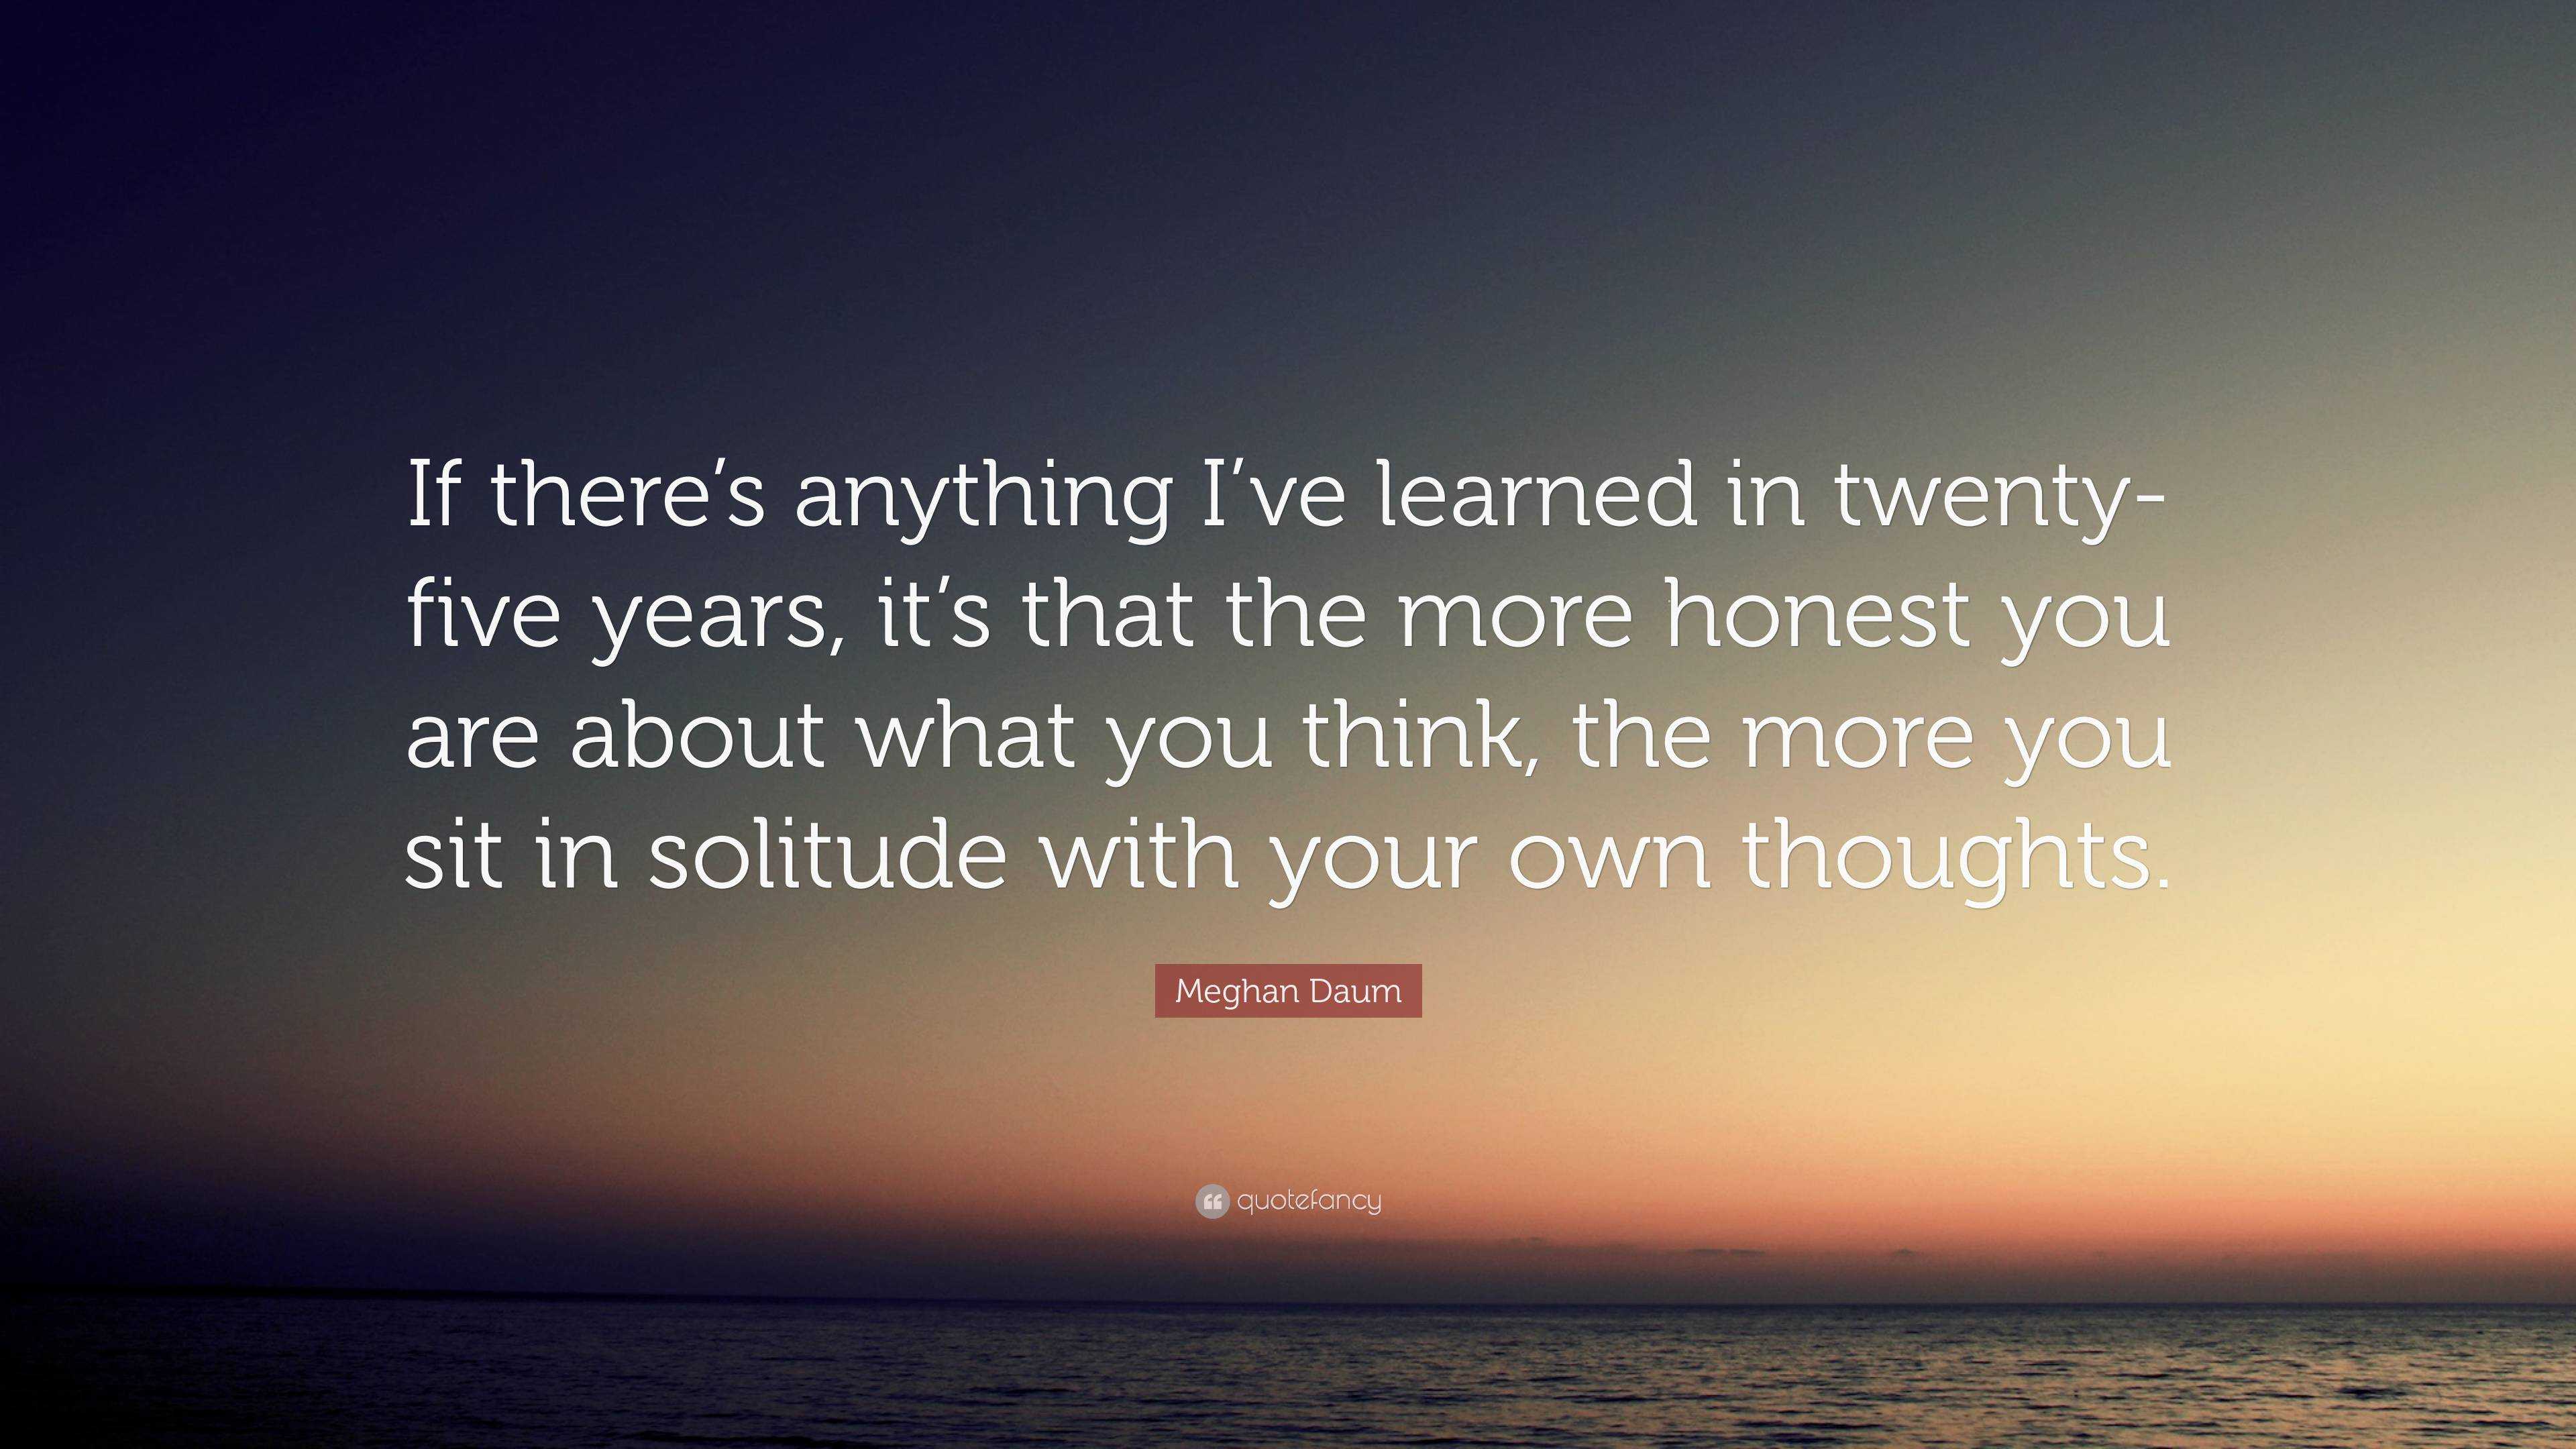 Meghan Daum Quote: “If there’s anything I’ve learned in twenty-five ...